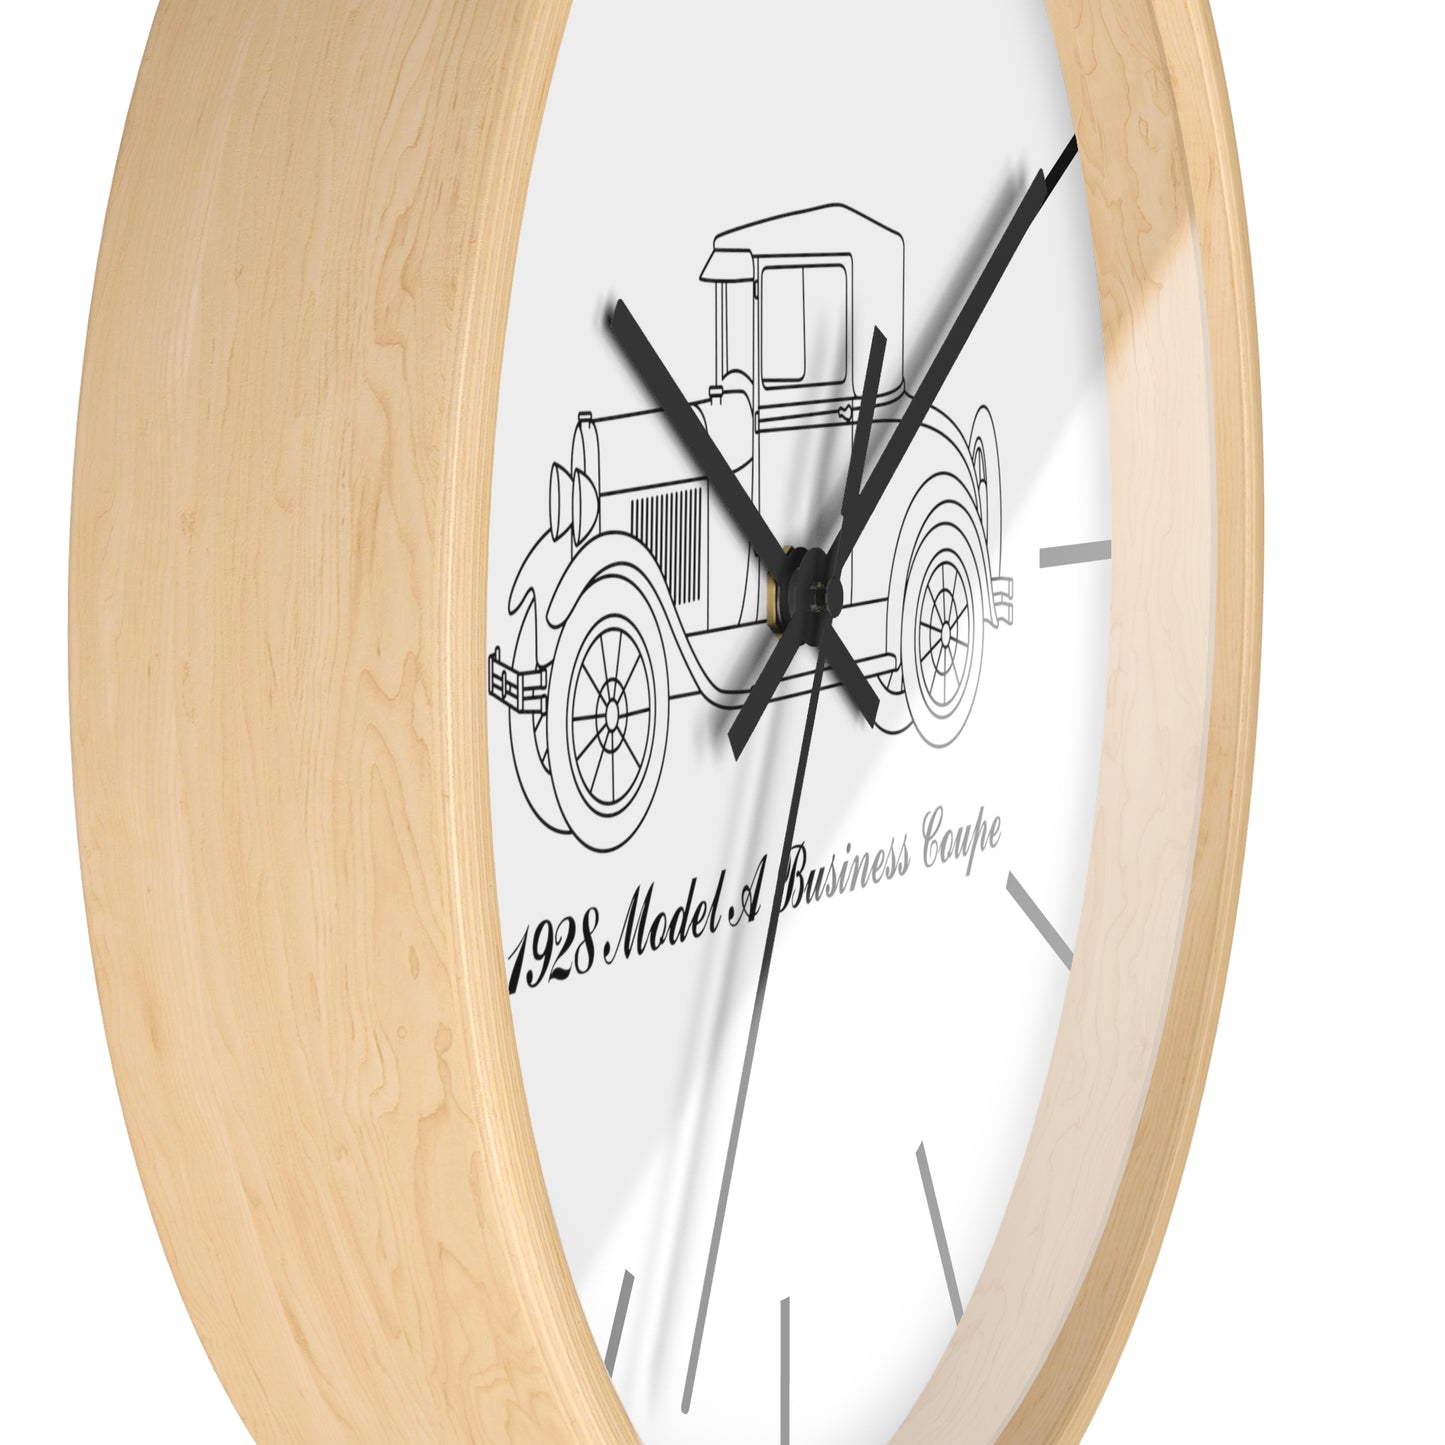 1928 Business Coupe Wall Clock